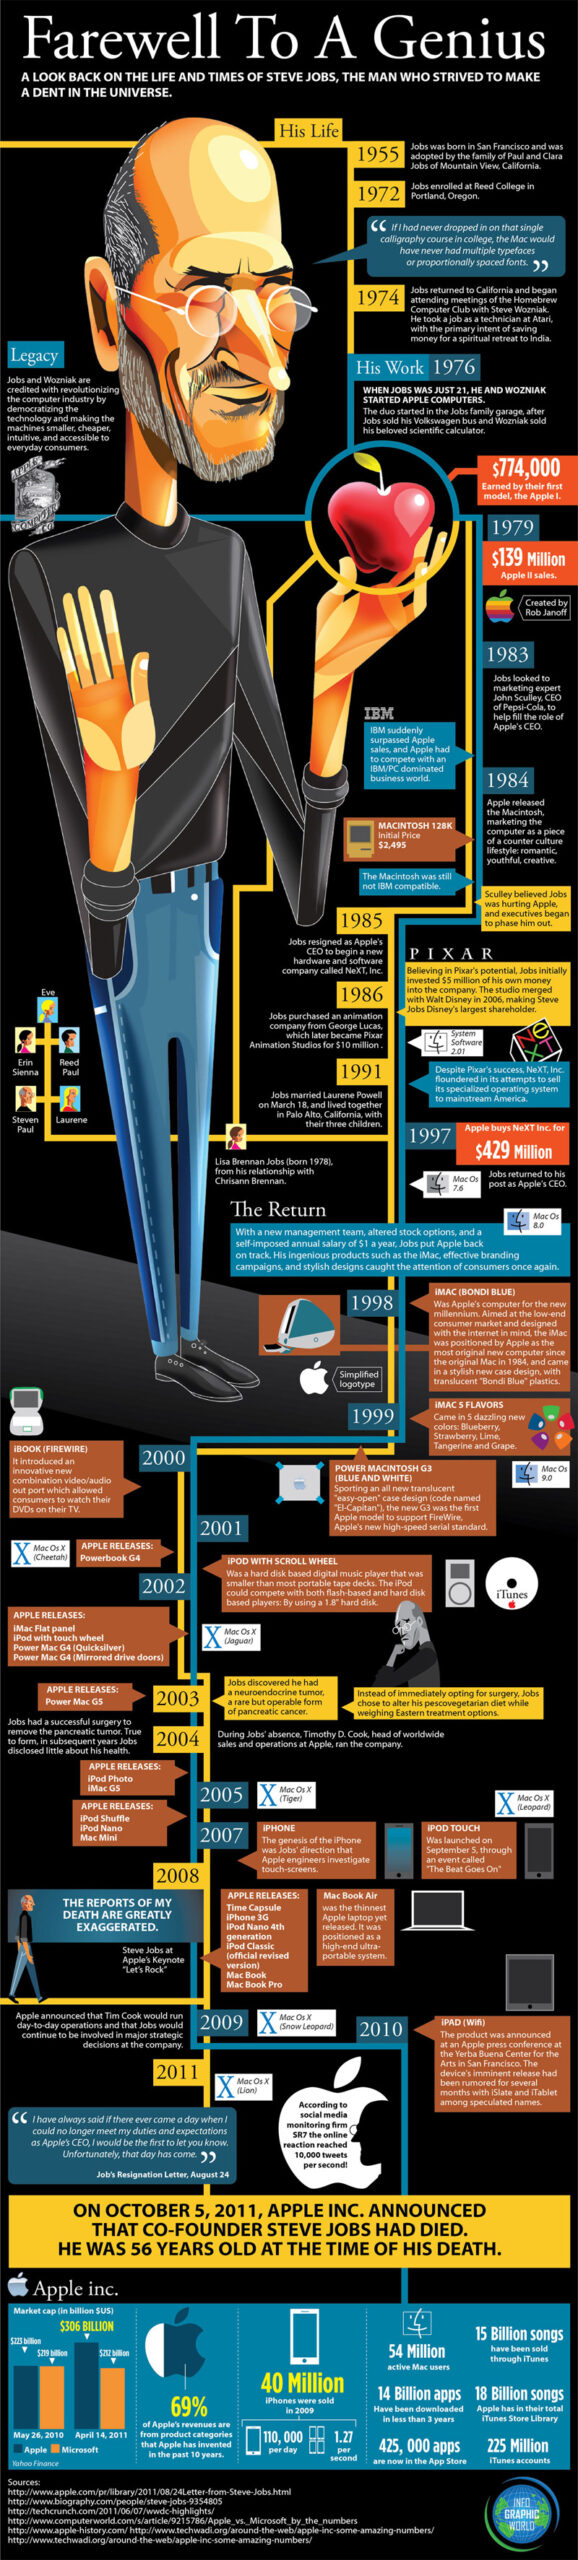 Michael Jackson biographical infographic - super detailed example to use for infographic ...